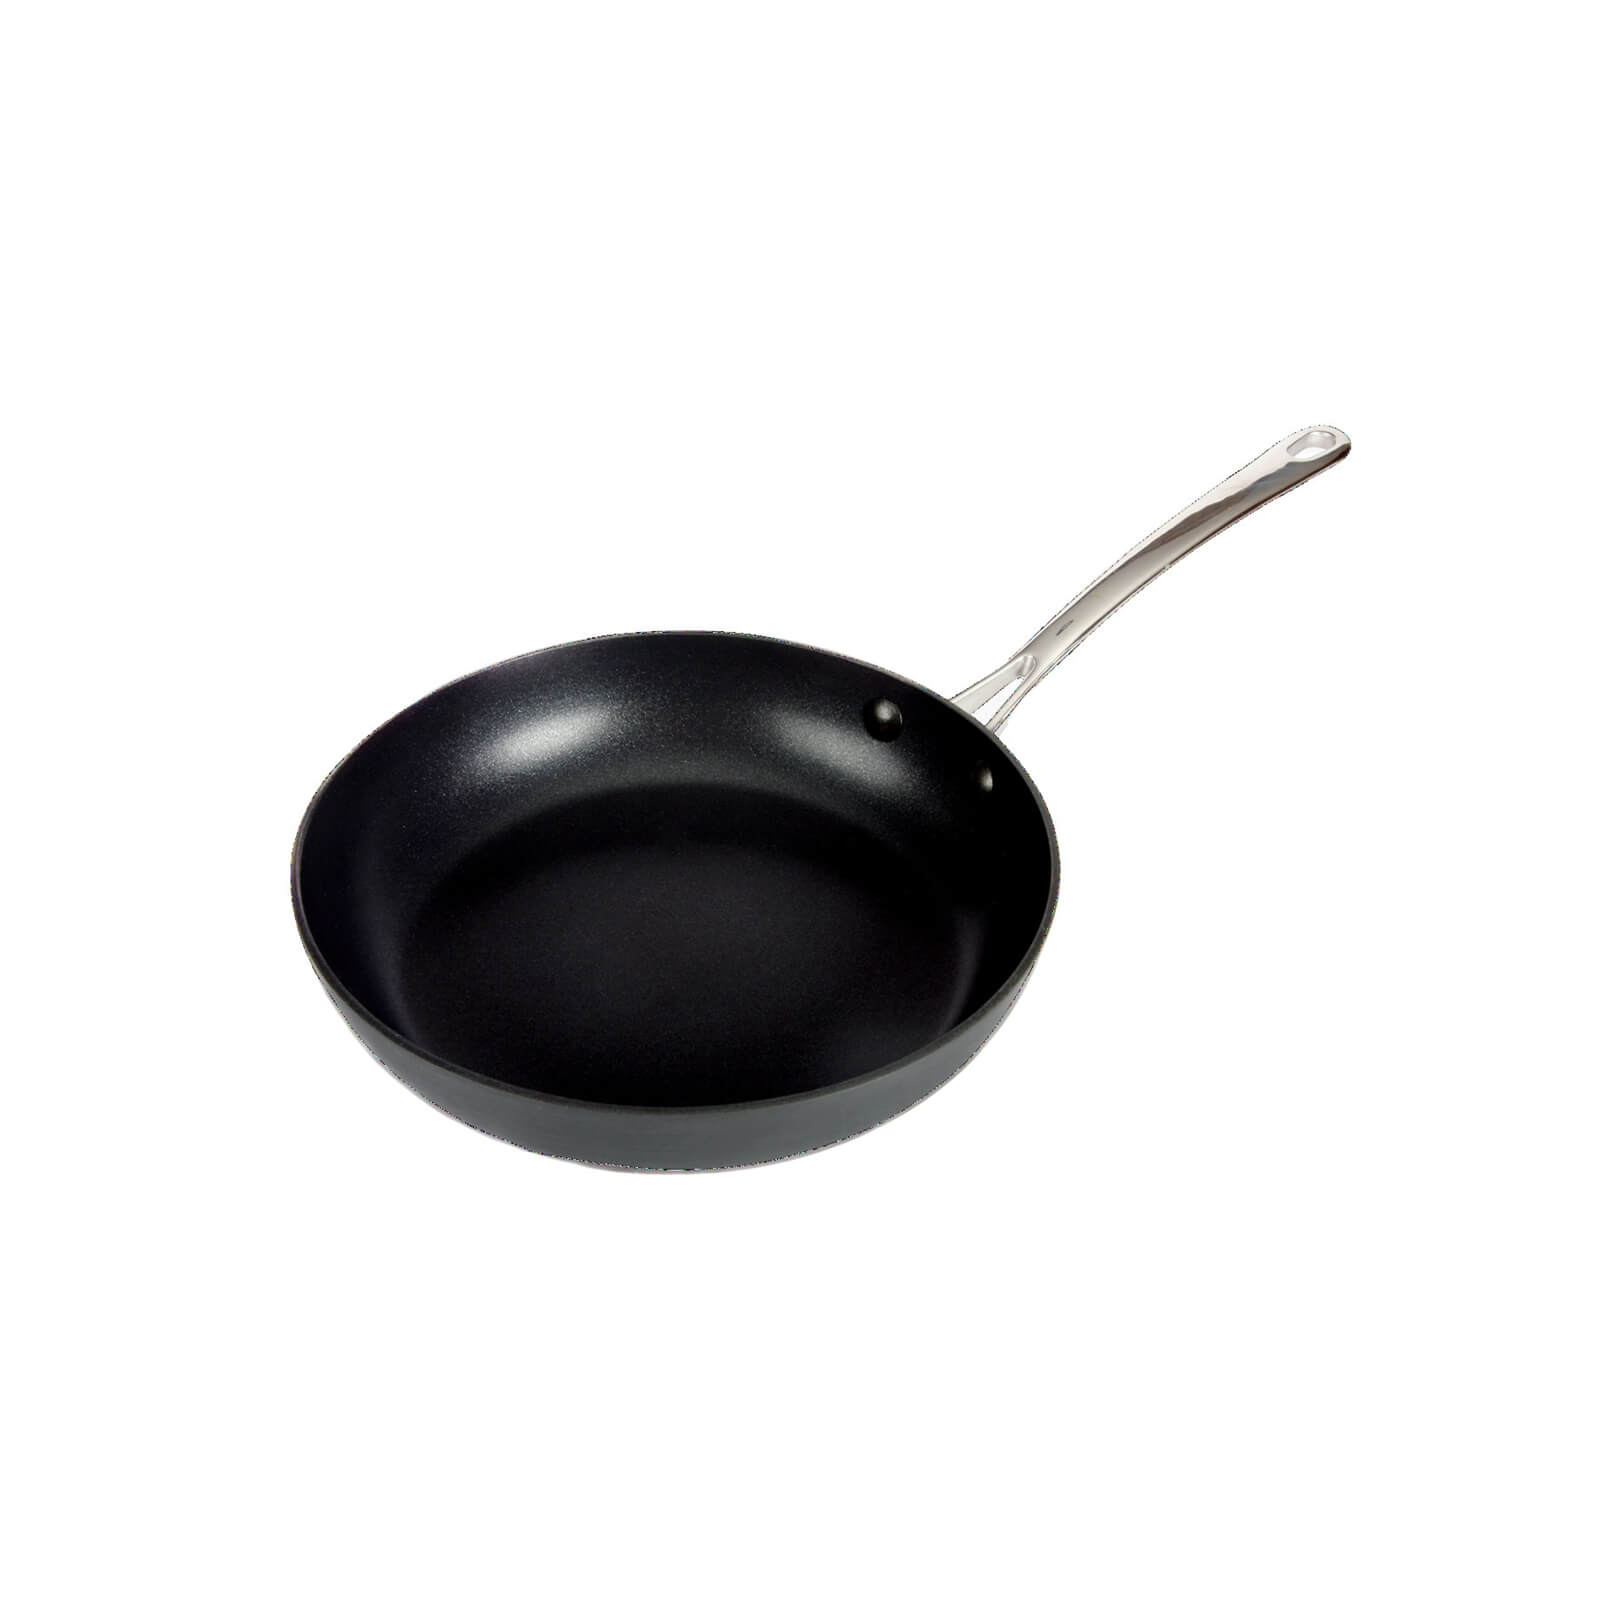 Denby Anodised 3 Piece Frying Pan Set